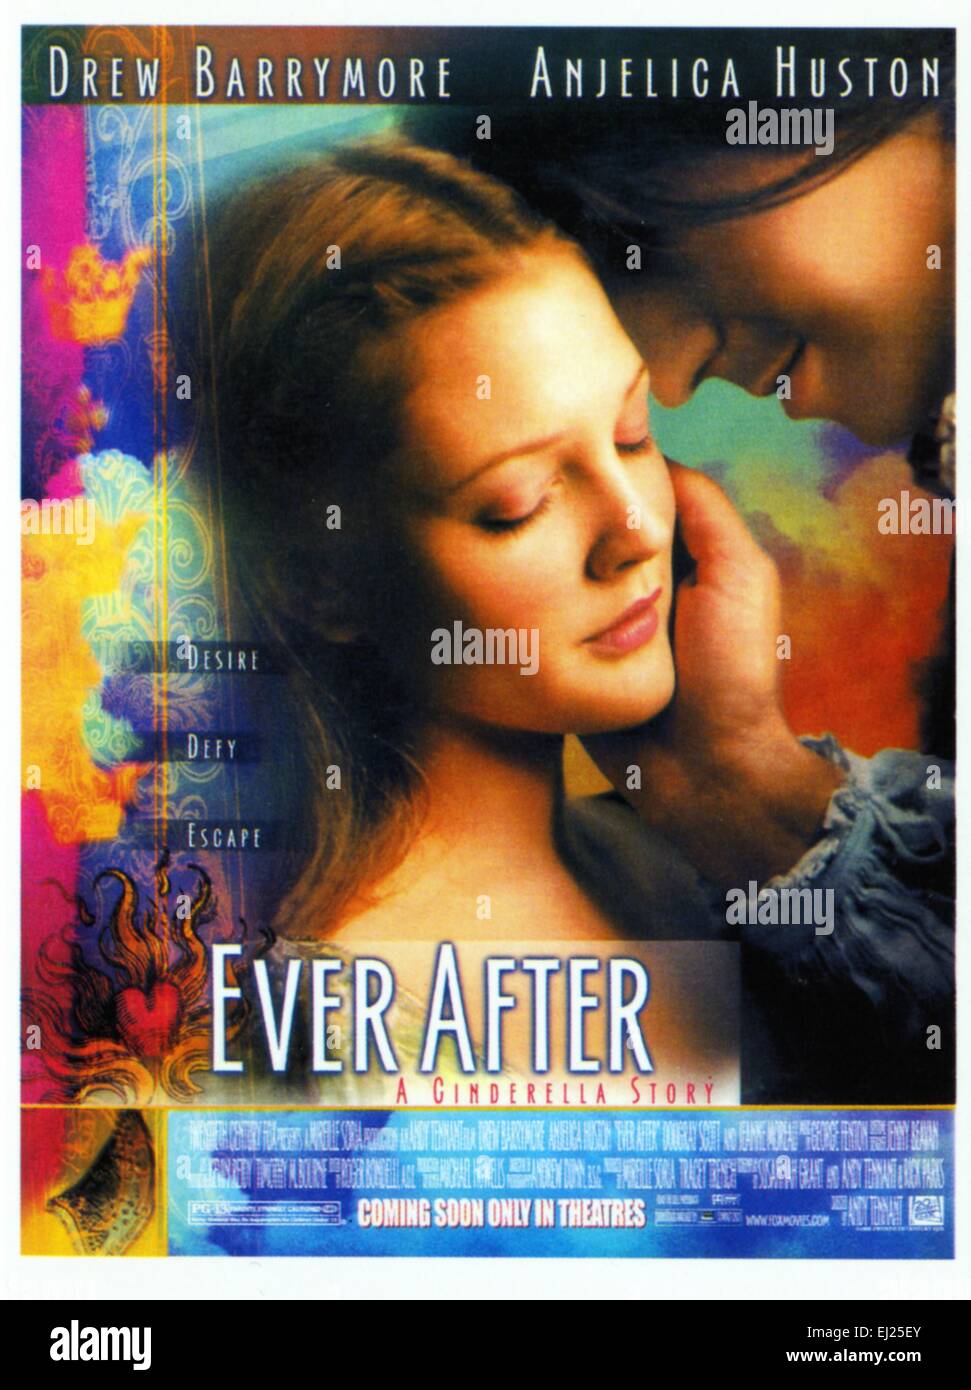 Ever After  - A Cinderella Story Year : 1998 USA Director : Andy Tennant Drew Barrymore Movie poster (USA) Stock Photo